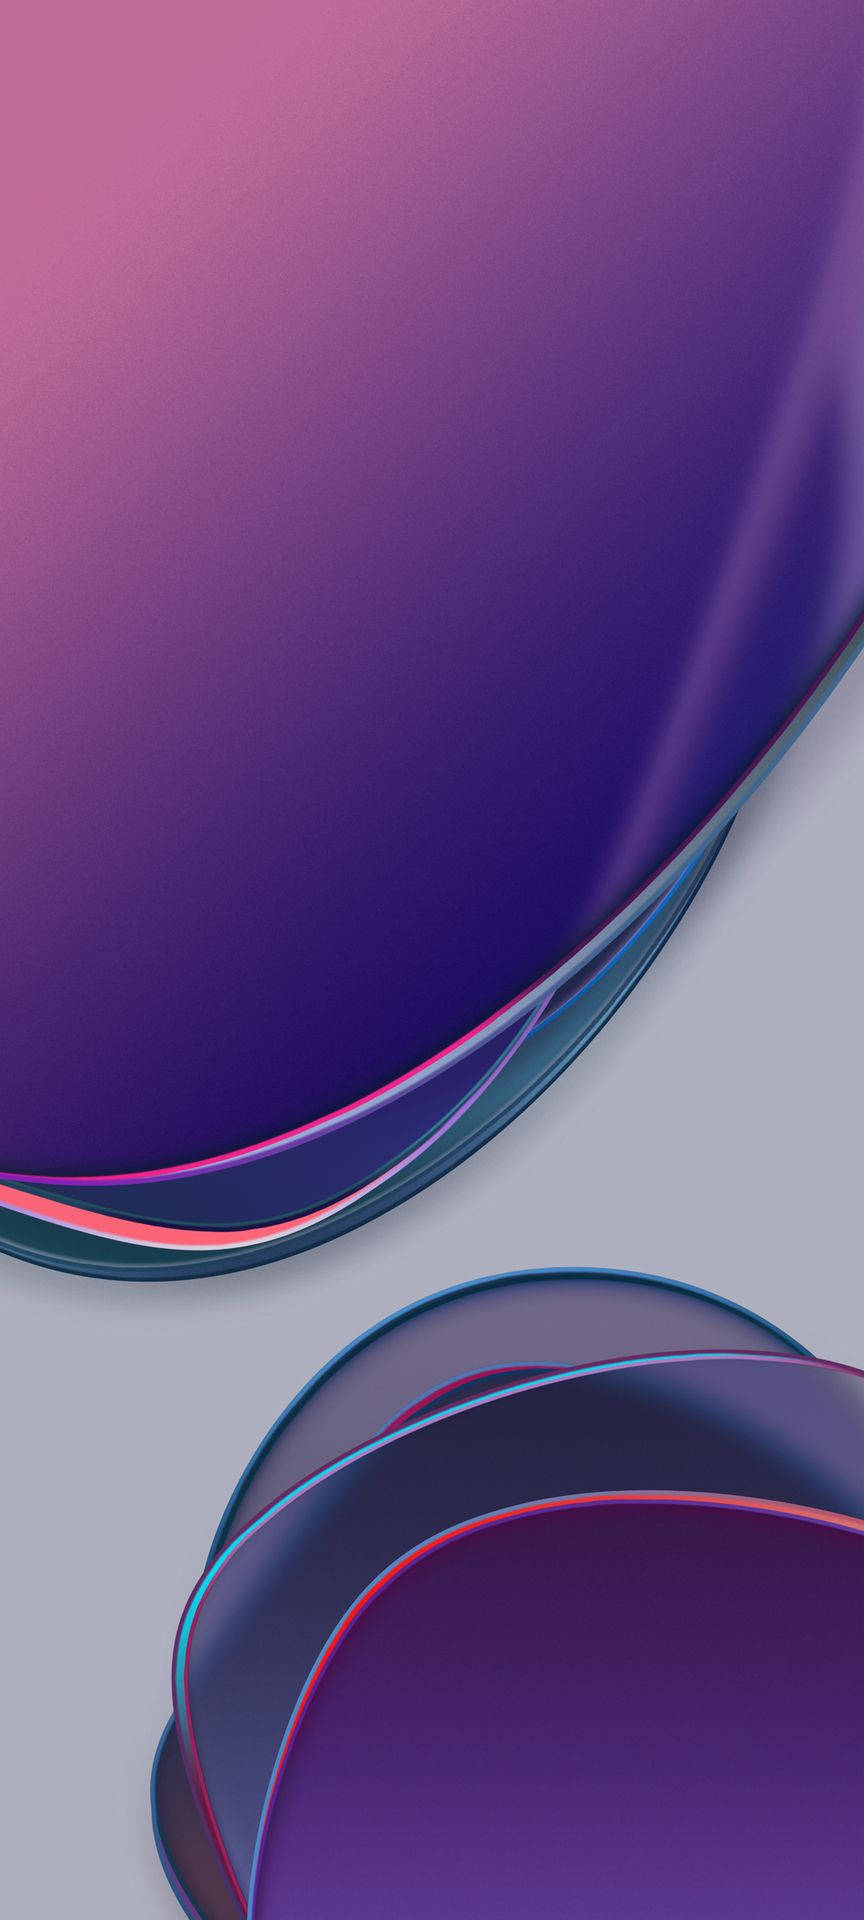 Vibrant Abstract Purple Discs Displayed on OnePlus 9R Screen Wallpaper